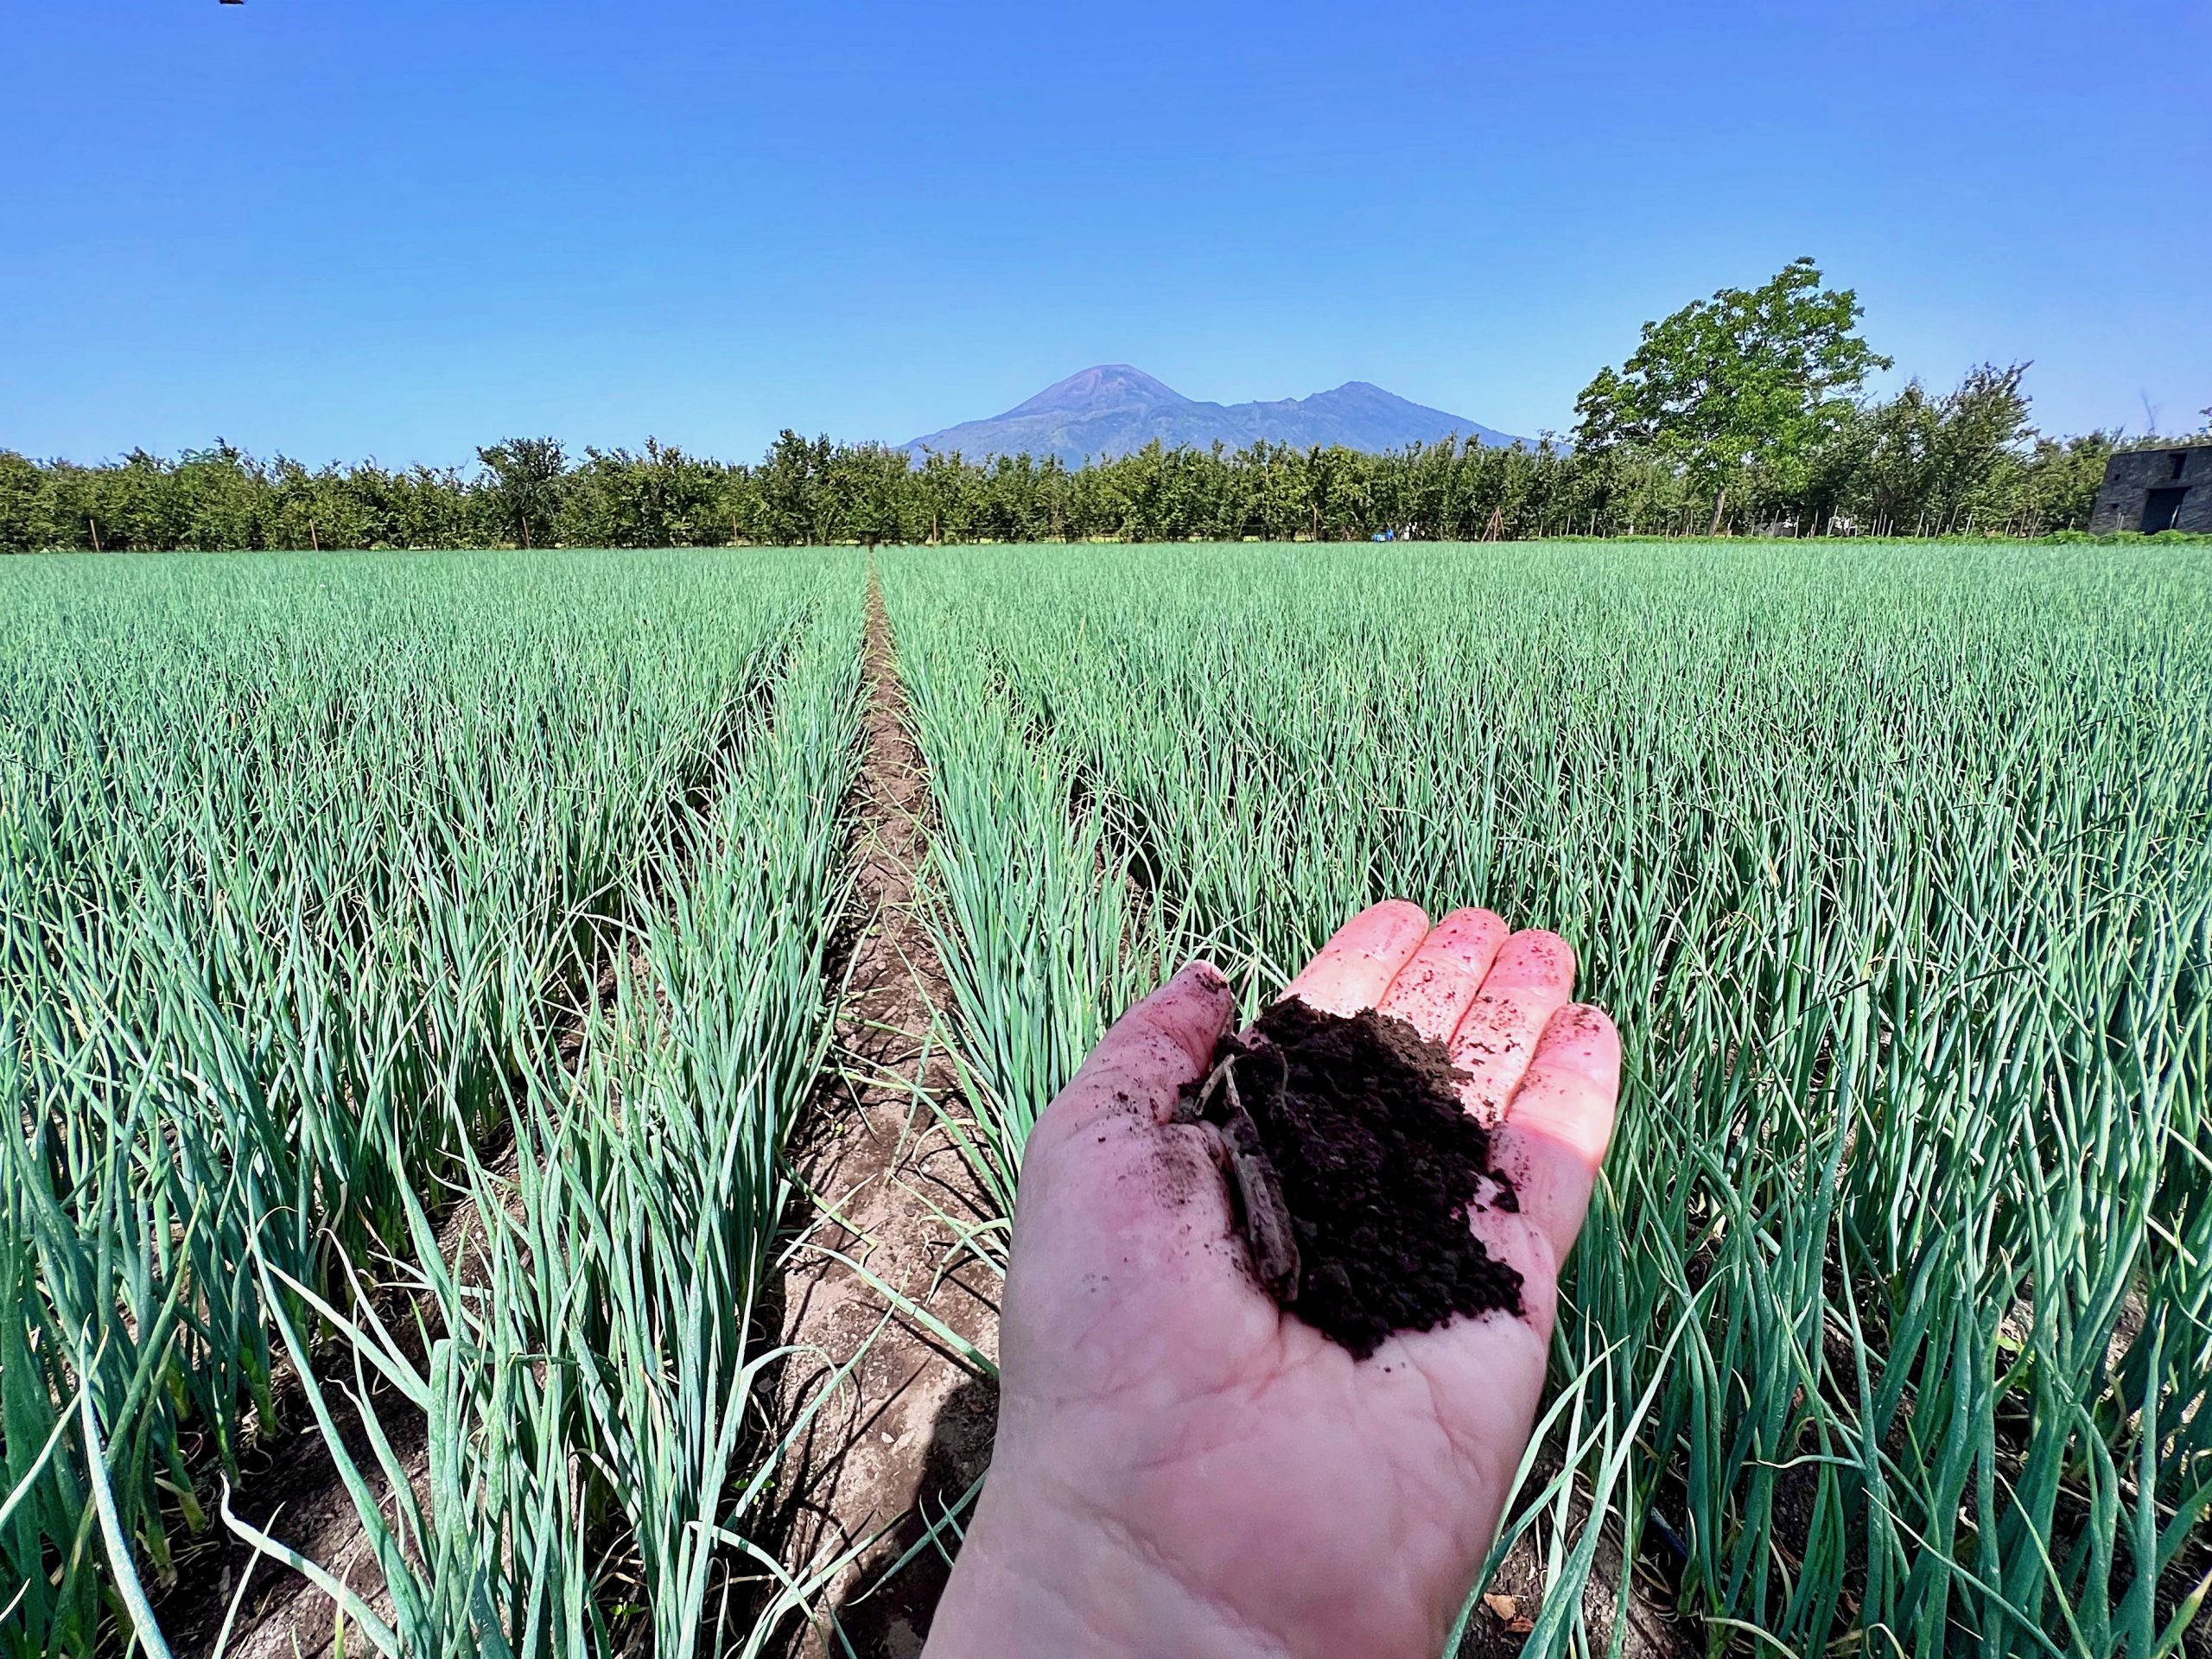 Spring onions growing, Vesuvius in the background, dark soil Pic:Kerstin Rodgers